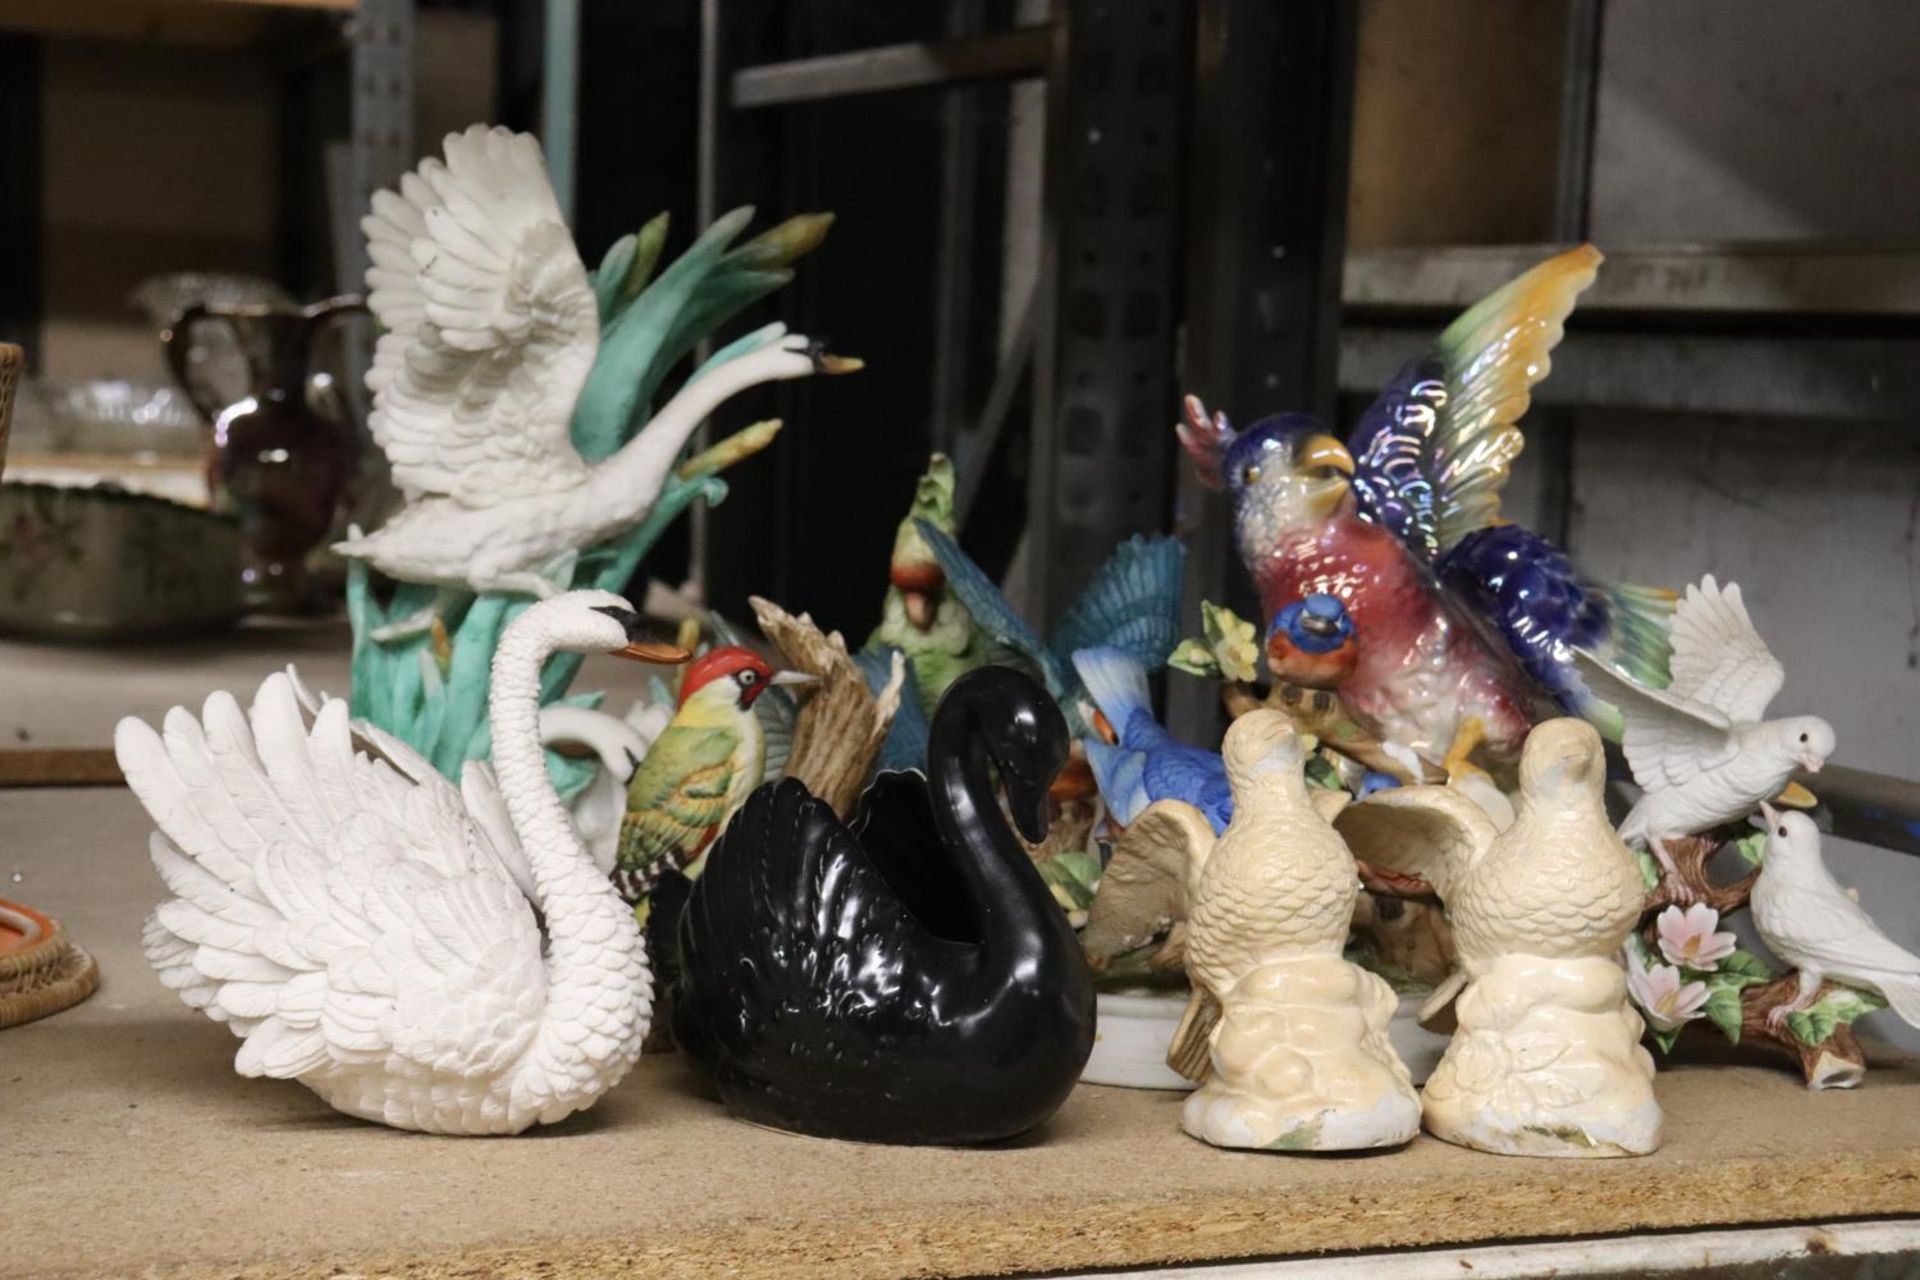 A COLLECTION OF BIRD FIGURINES TO INCLUDE SWANS, A PARROT, WOODPECKER, ETC